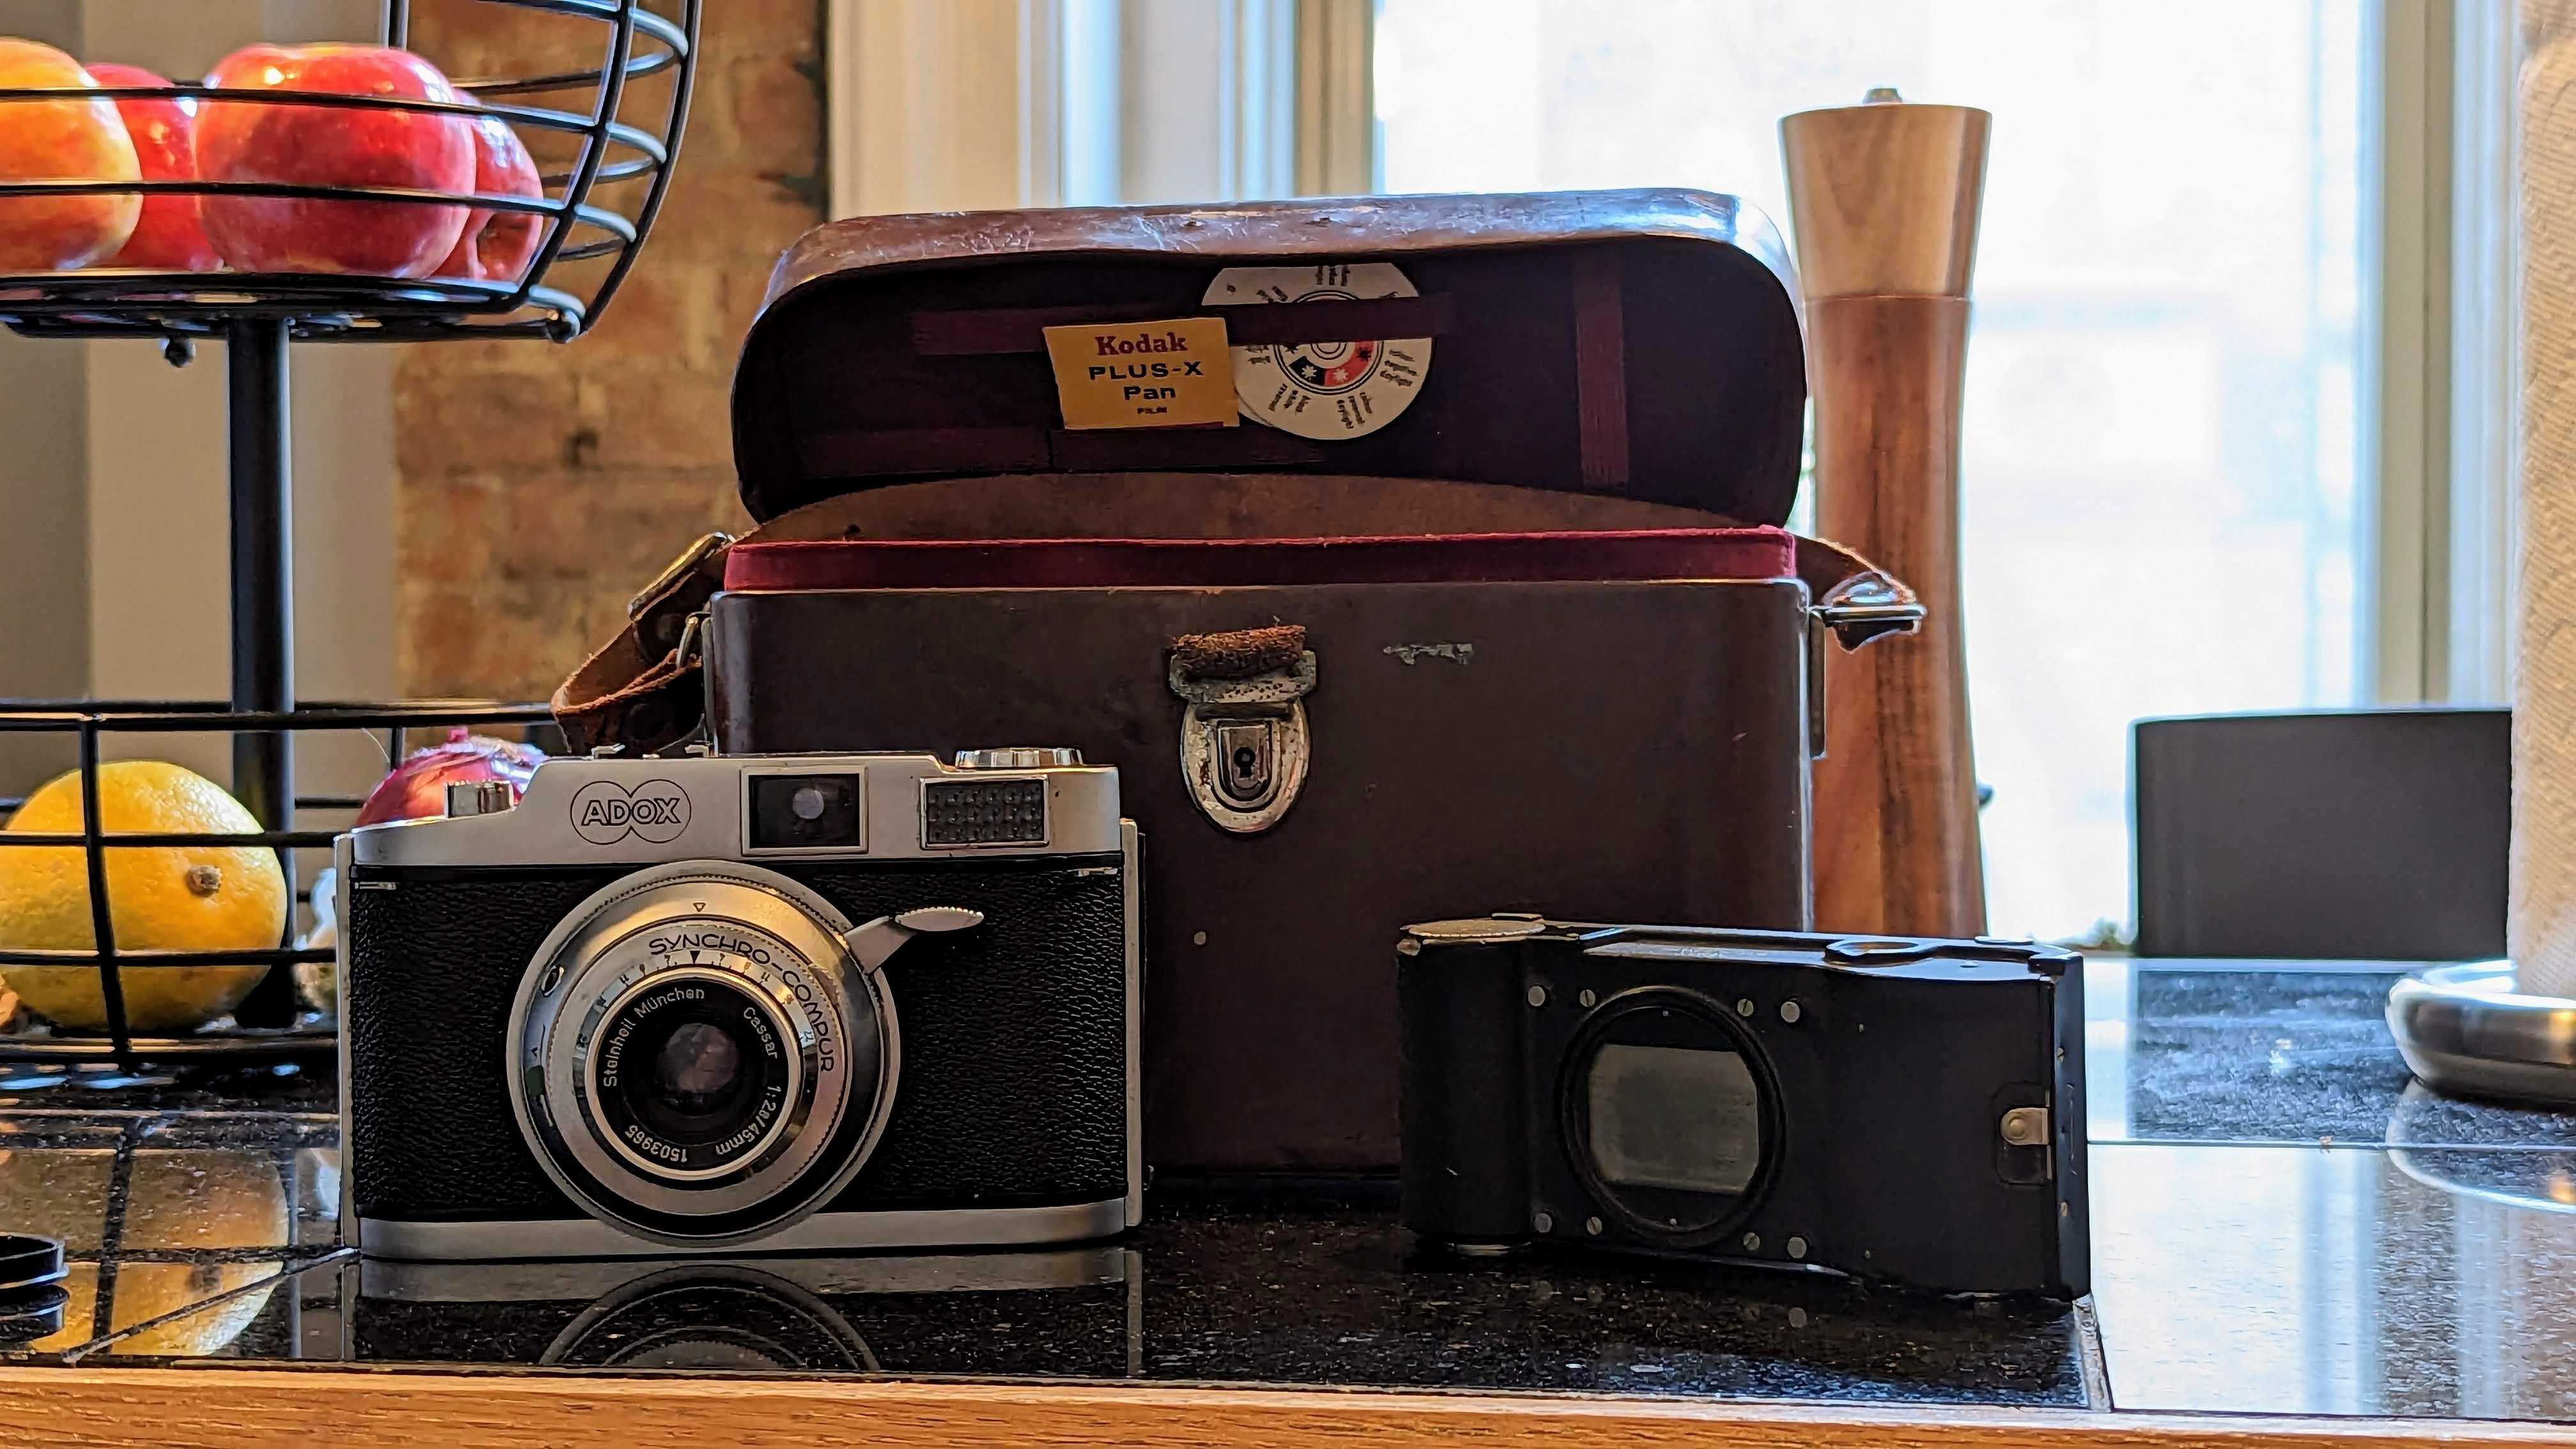 My grandfathers film camera, which needs some love